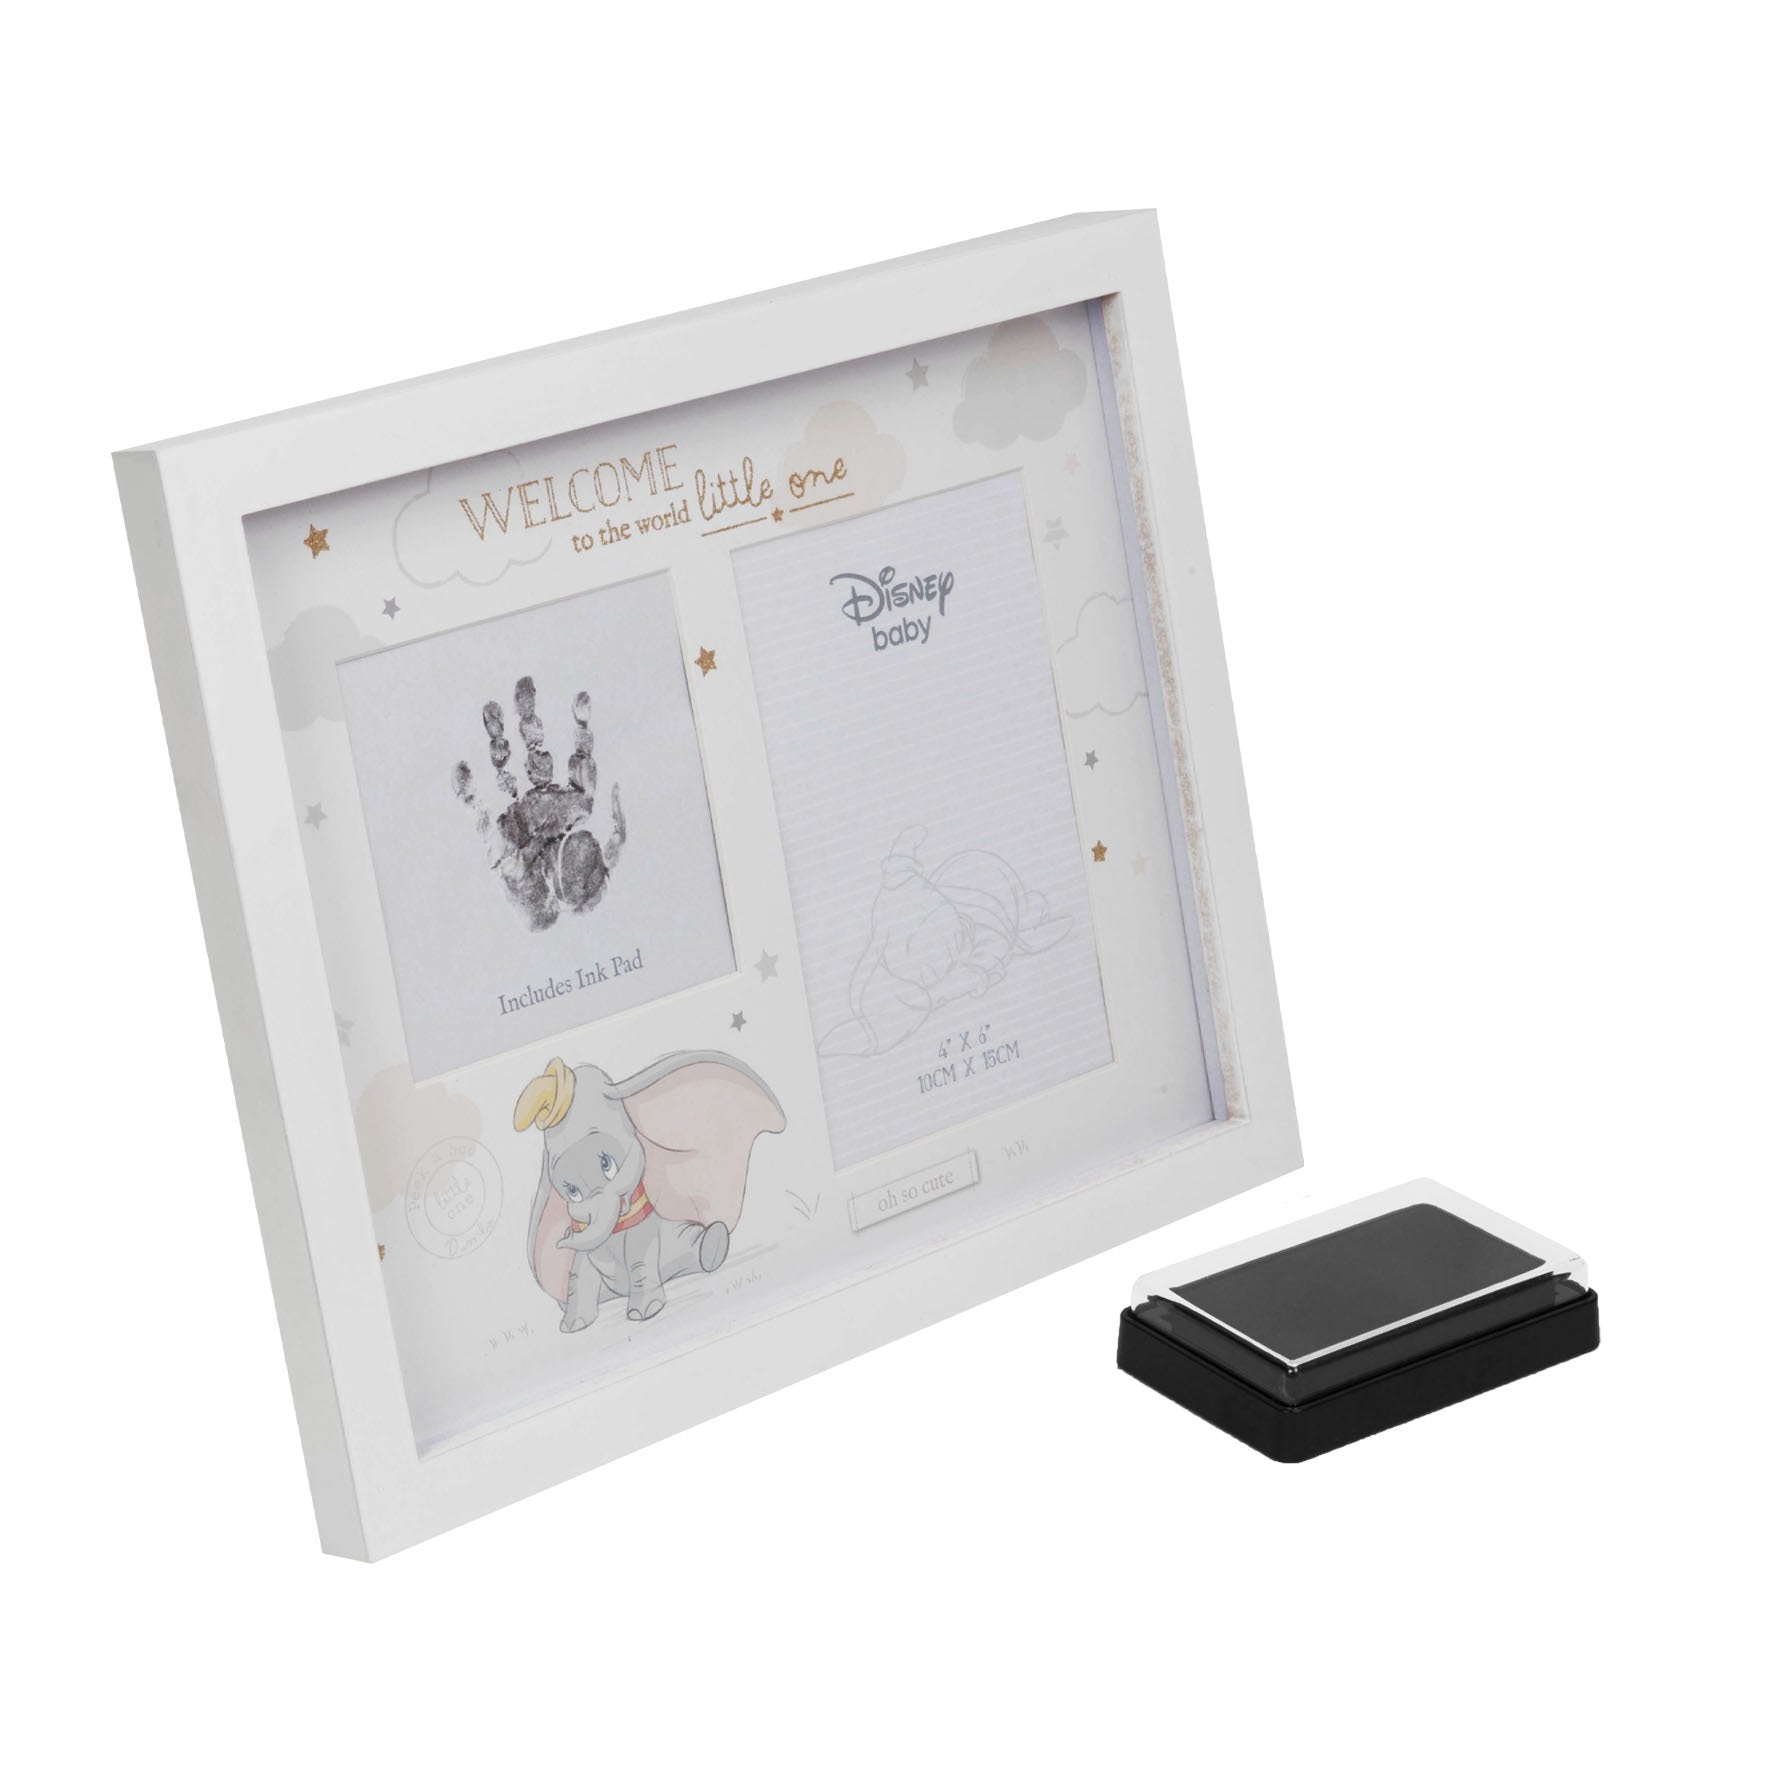 Disney Baby Hand Print & Photo Frame Dumbo Box Includes Ink Pad Gifts Toys Games Creative